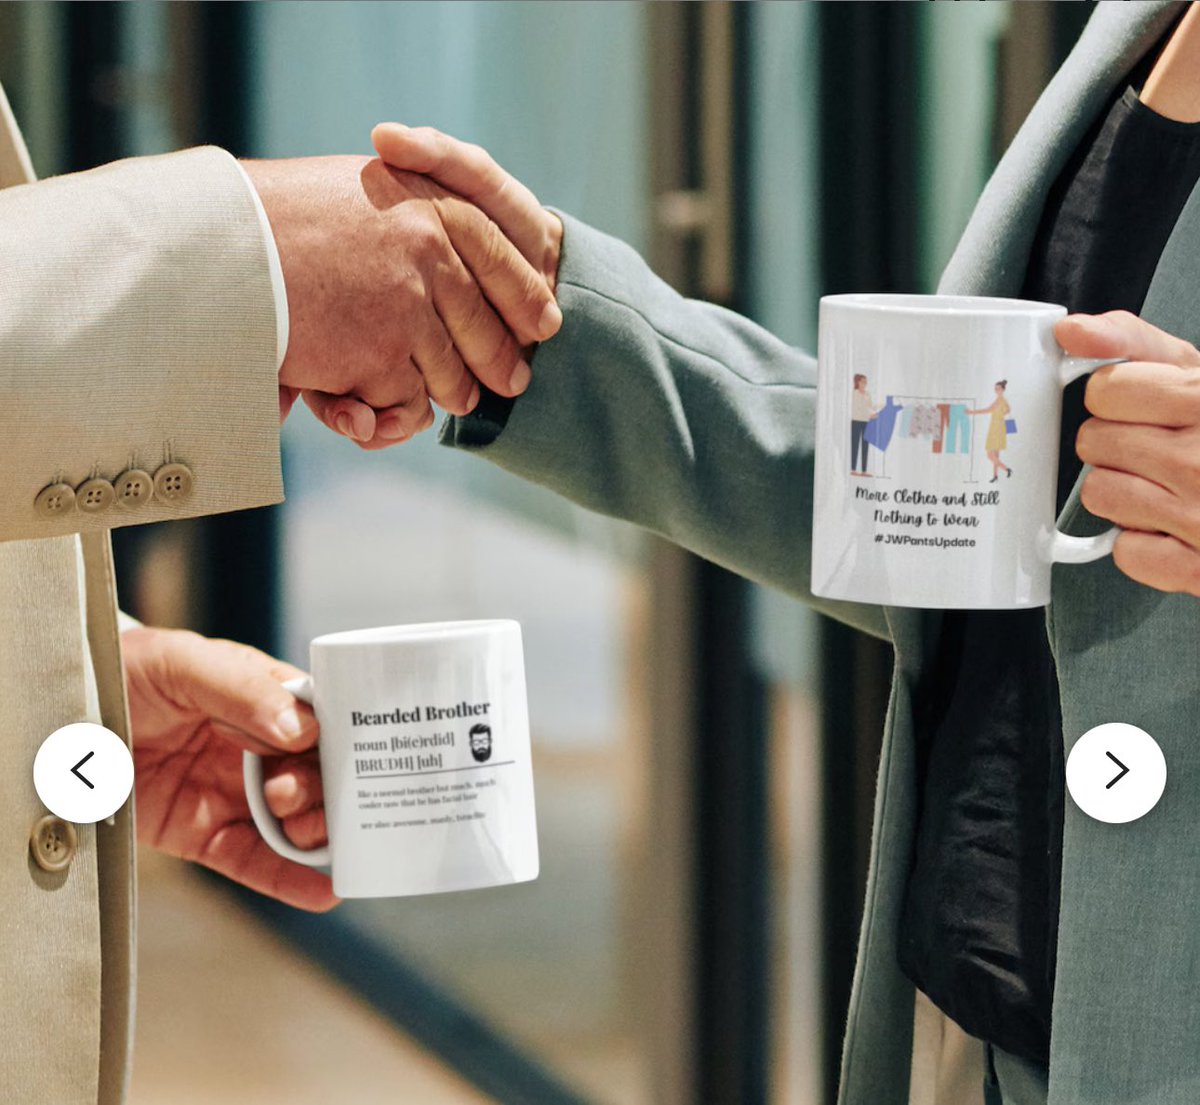 “And taking a cup, he offered thanks and gave it to them, saying: Add please a graphic and some amusing words about the latest Governing Body Update and sell it on Etsy” Get your “Bearded Brother” JW Update #8 Beard ceramic mug and your “JW Sisters in Pants Update Mug” here!